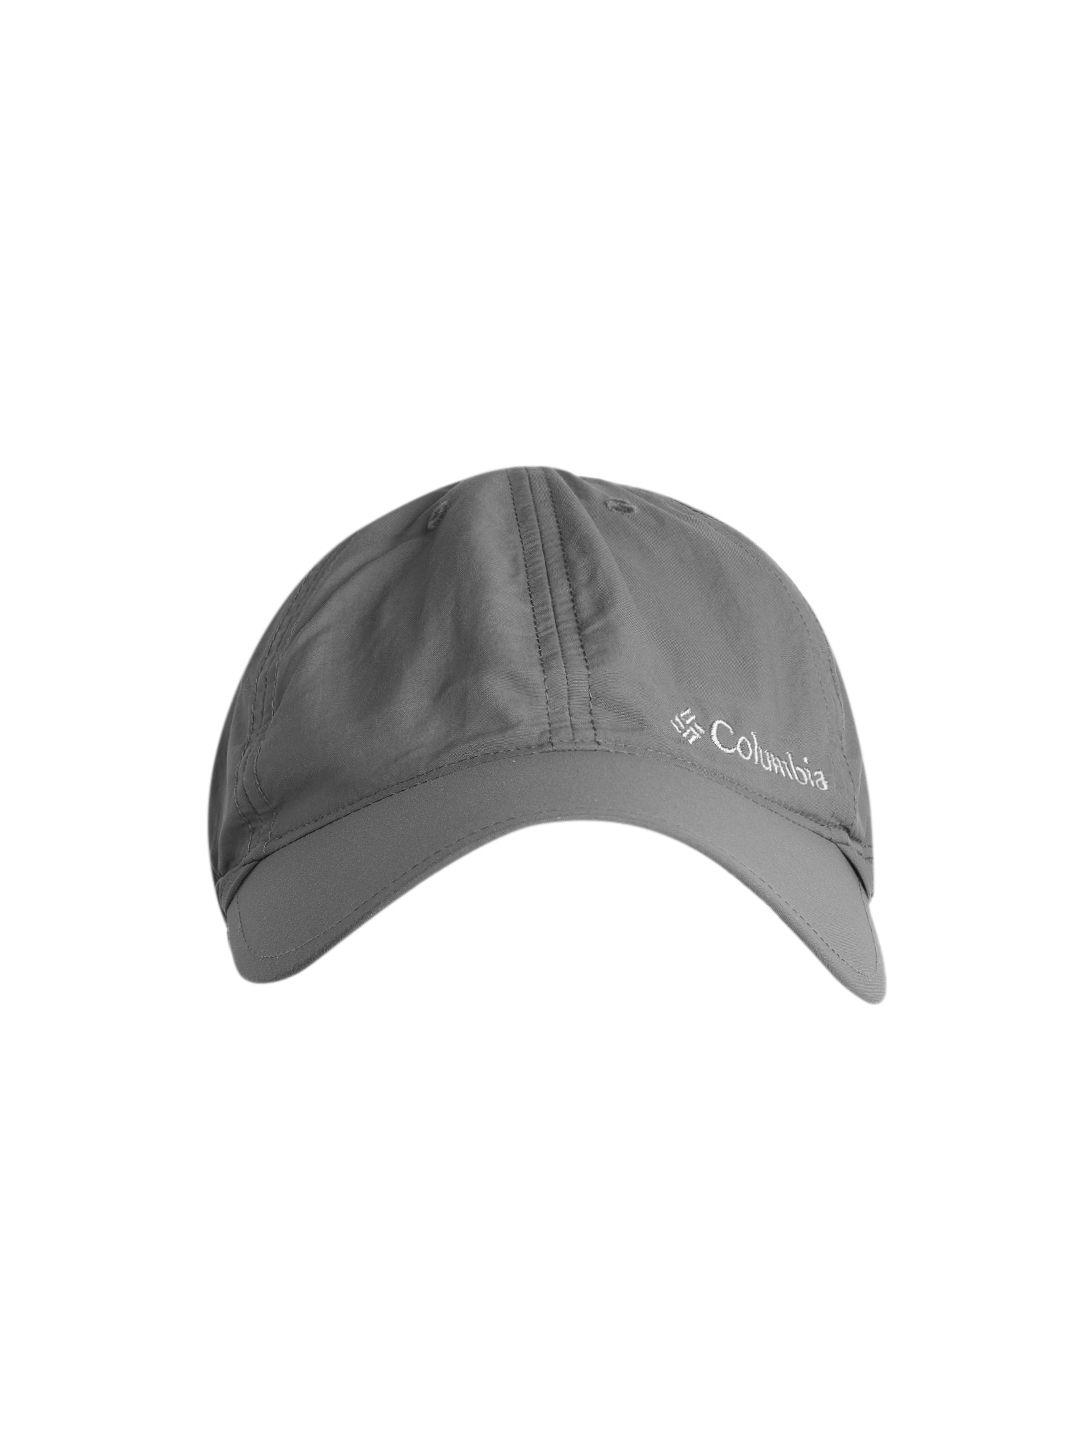 columbia unisex charcoal brand logo embroidered baseball cap with ear flap